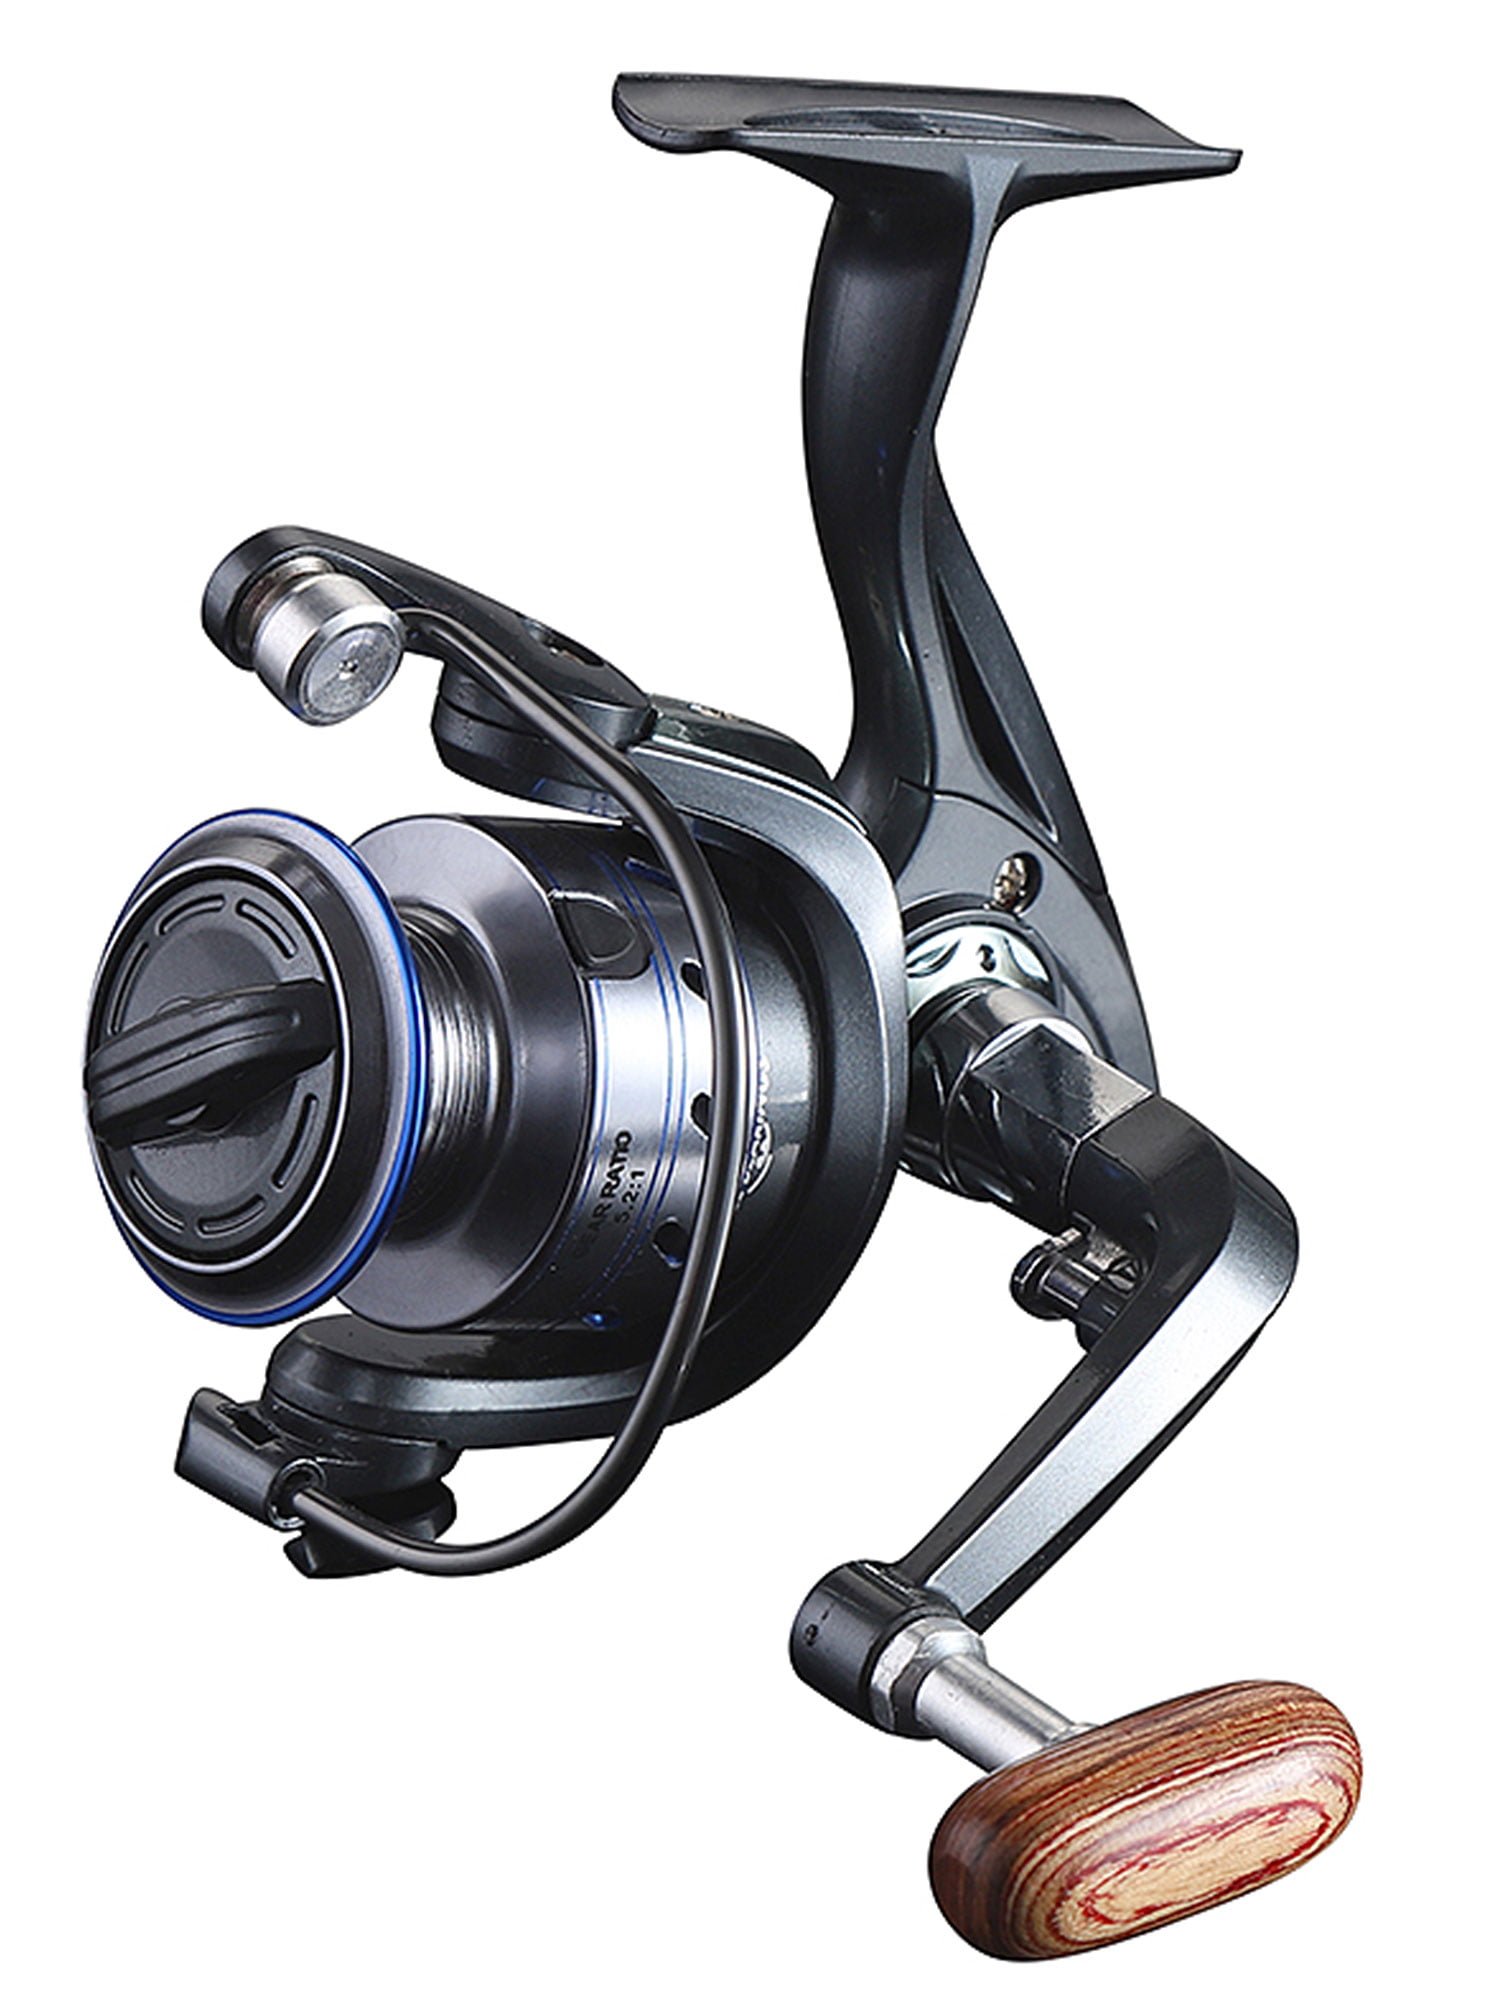 Fishing Spinning Reel 7000 High Speed 13+1BB 4.7:1 Bass Pike Trout Saltwater 